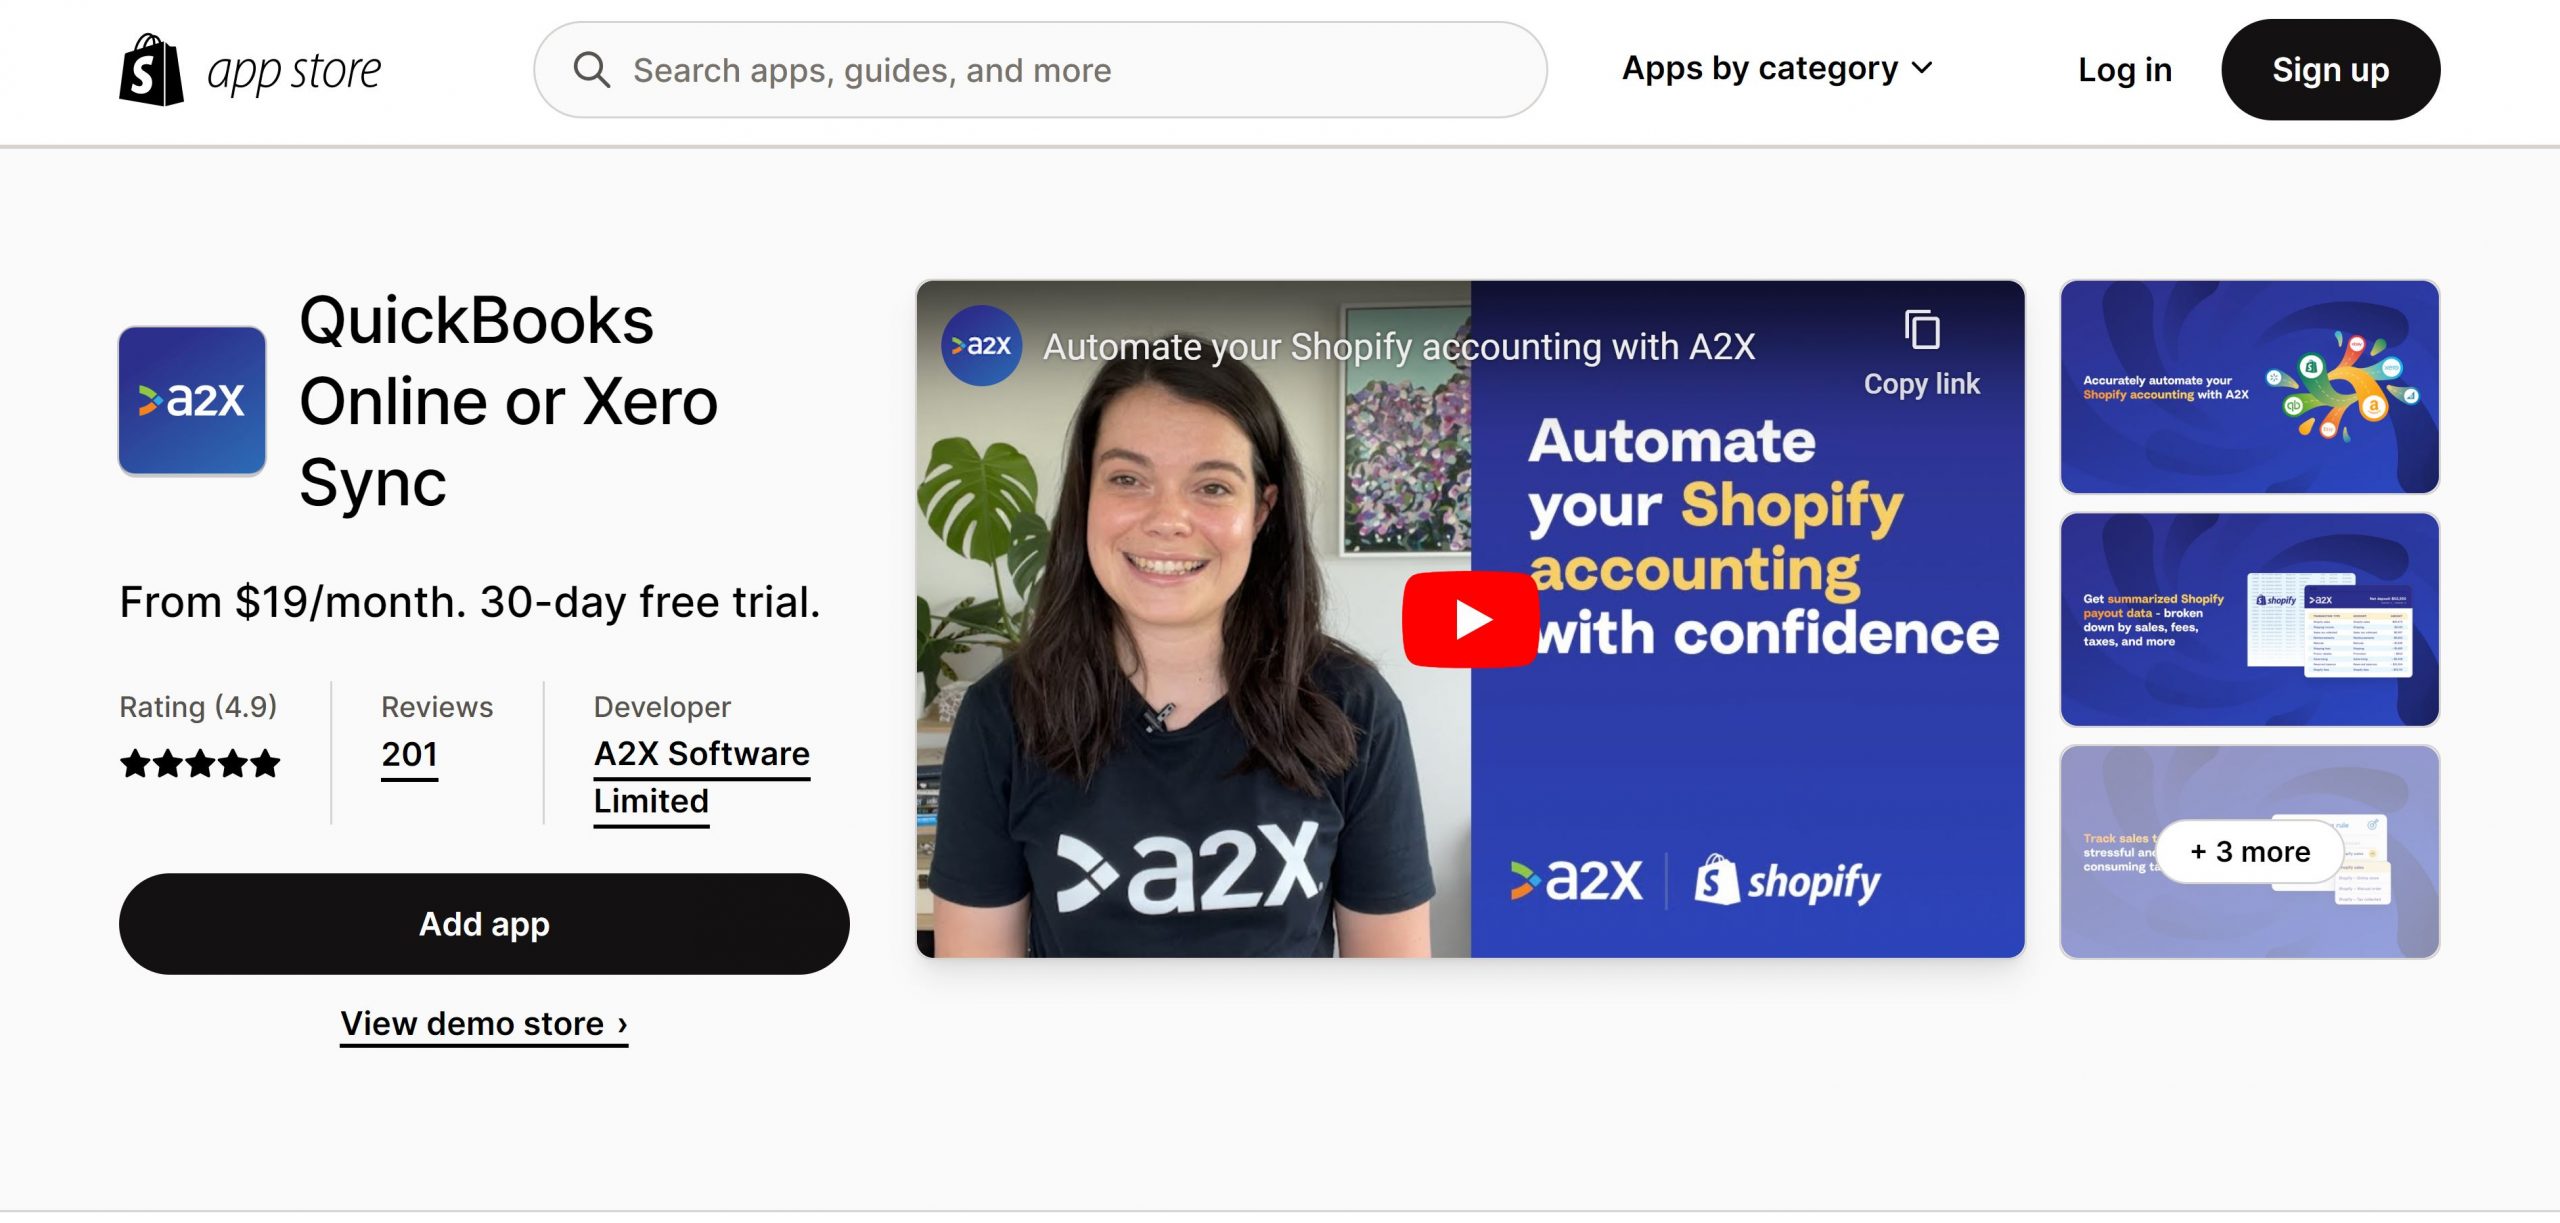 QuickBooks Online or Xero Sync by A2X on the Shopify app store.